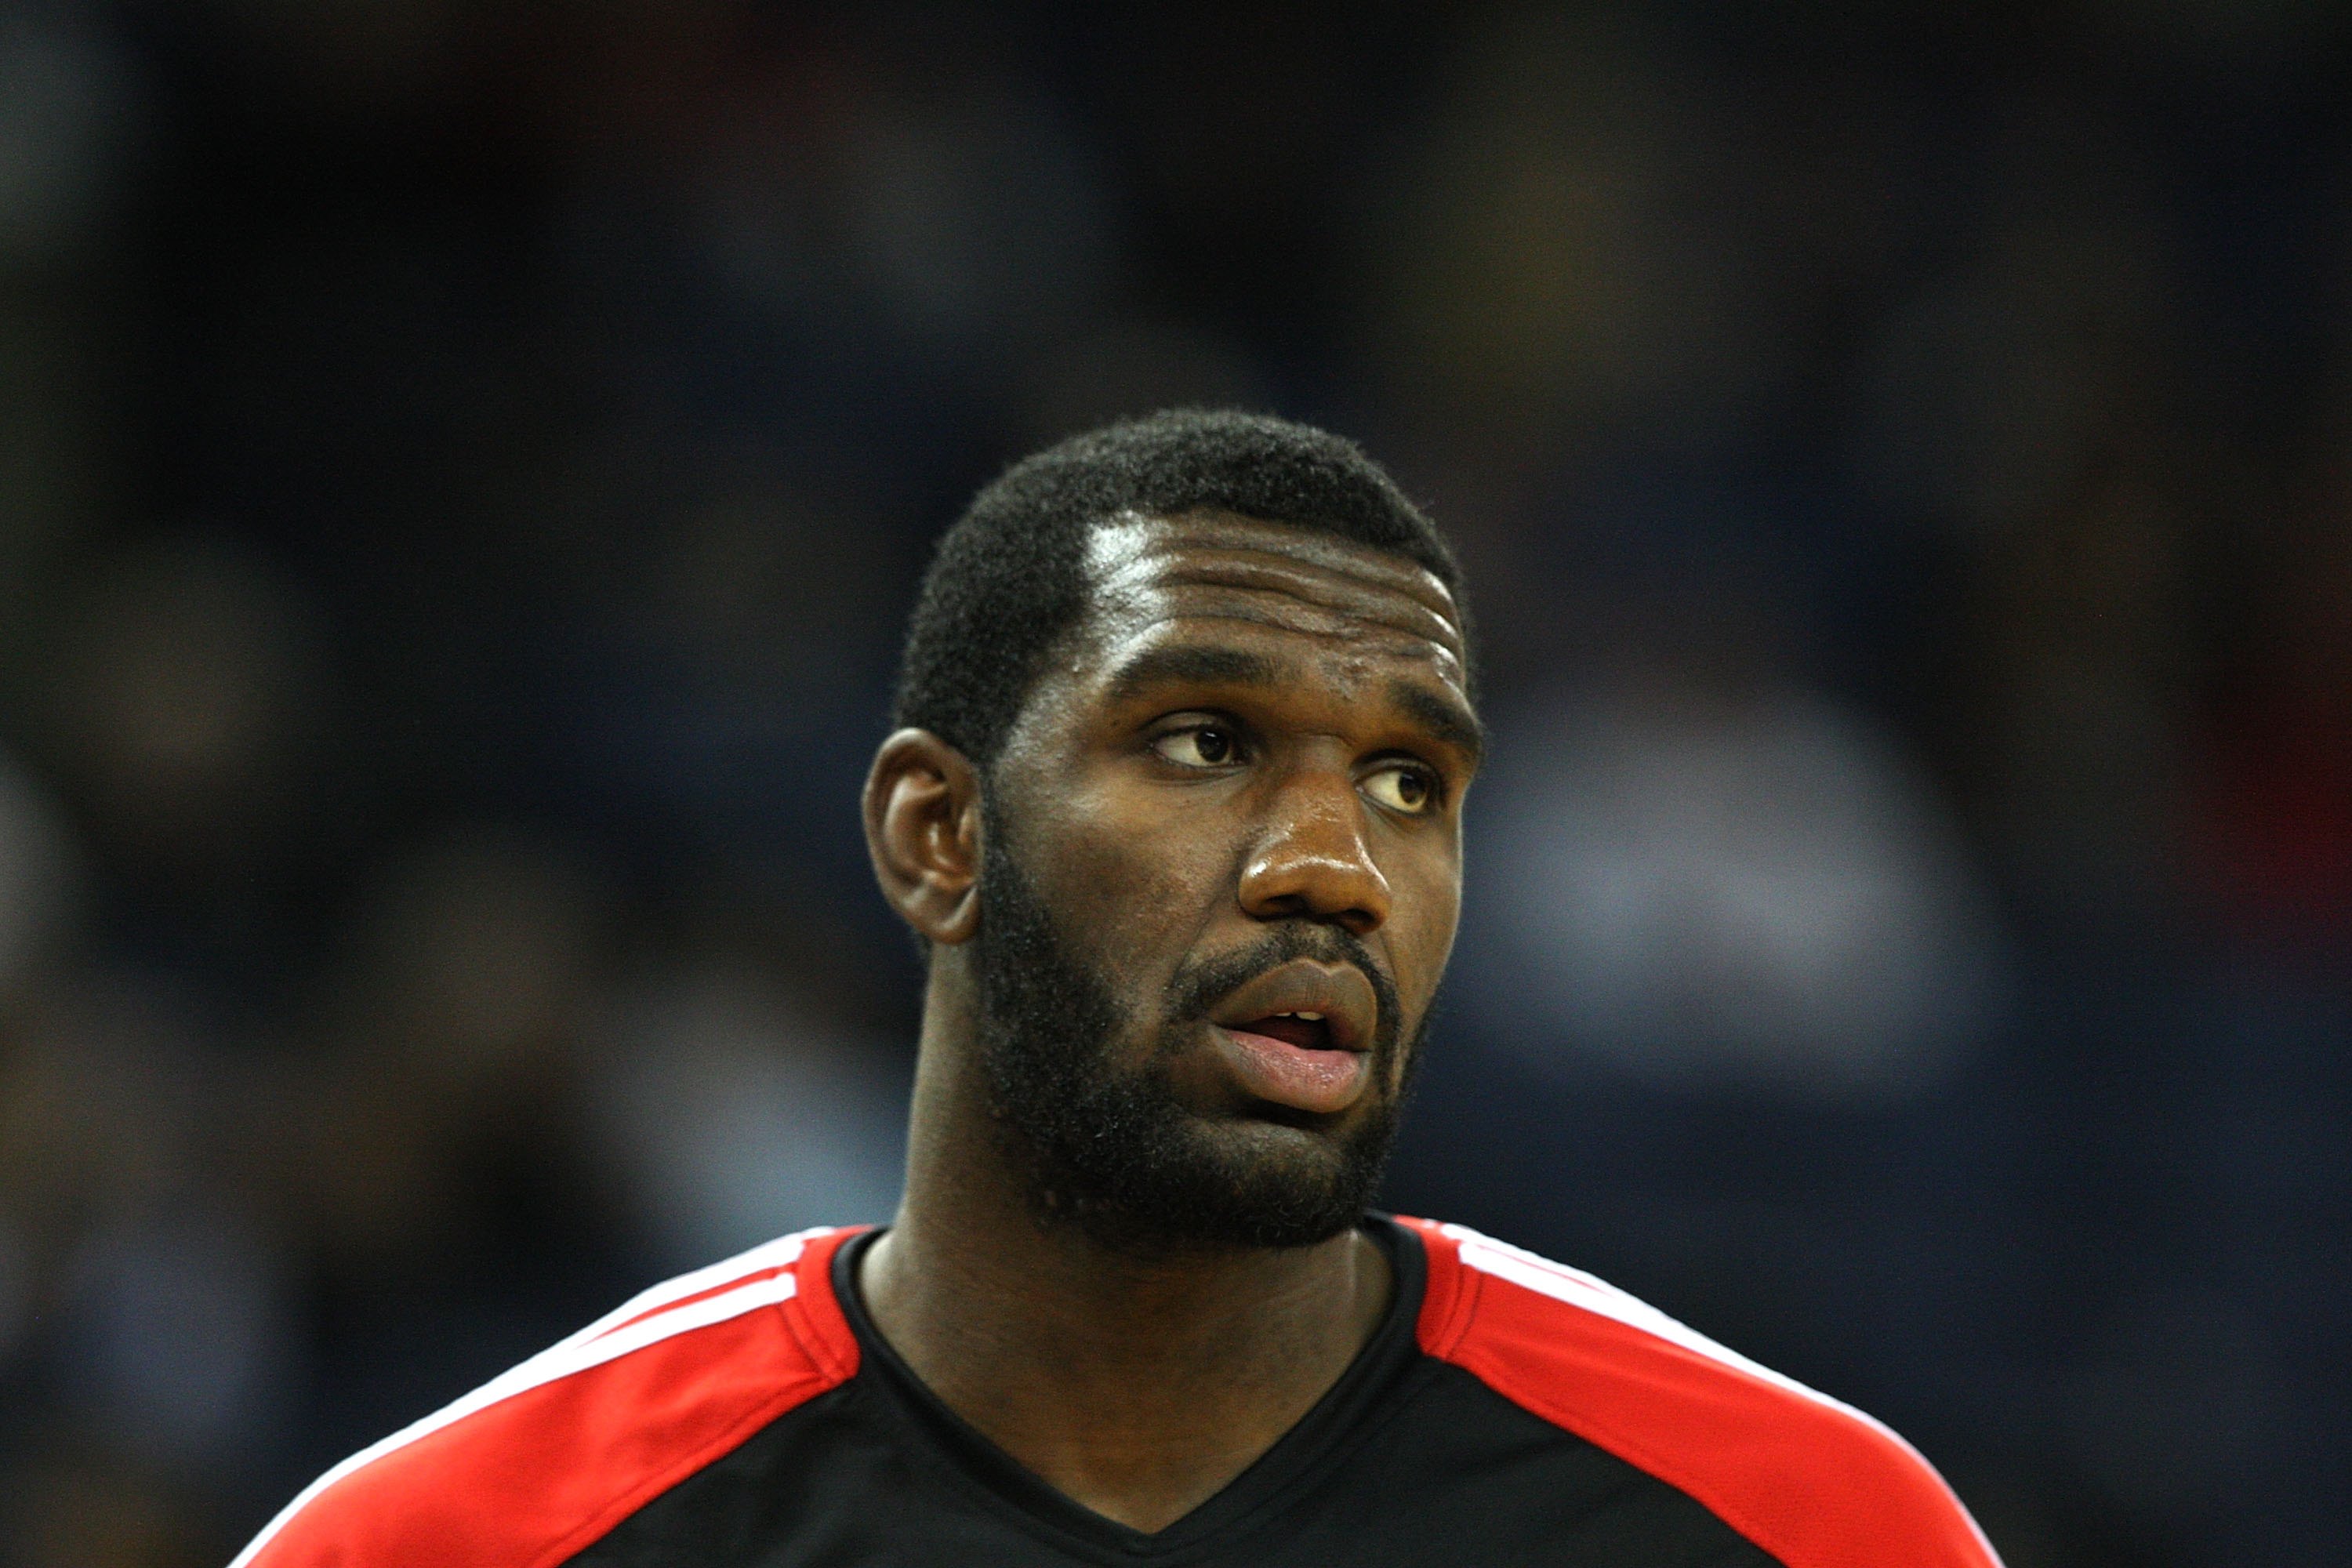 OAKLAND, CA - NOVEMBER 20:  Greg Oden #52 of the Portland Trail Blazers looks on against the Golden State Warriors during an NBA game at Oracle Arena on November 20, 2009 in Oakland, California.  (Photo by Jed Jacobsohn/Getty Images)